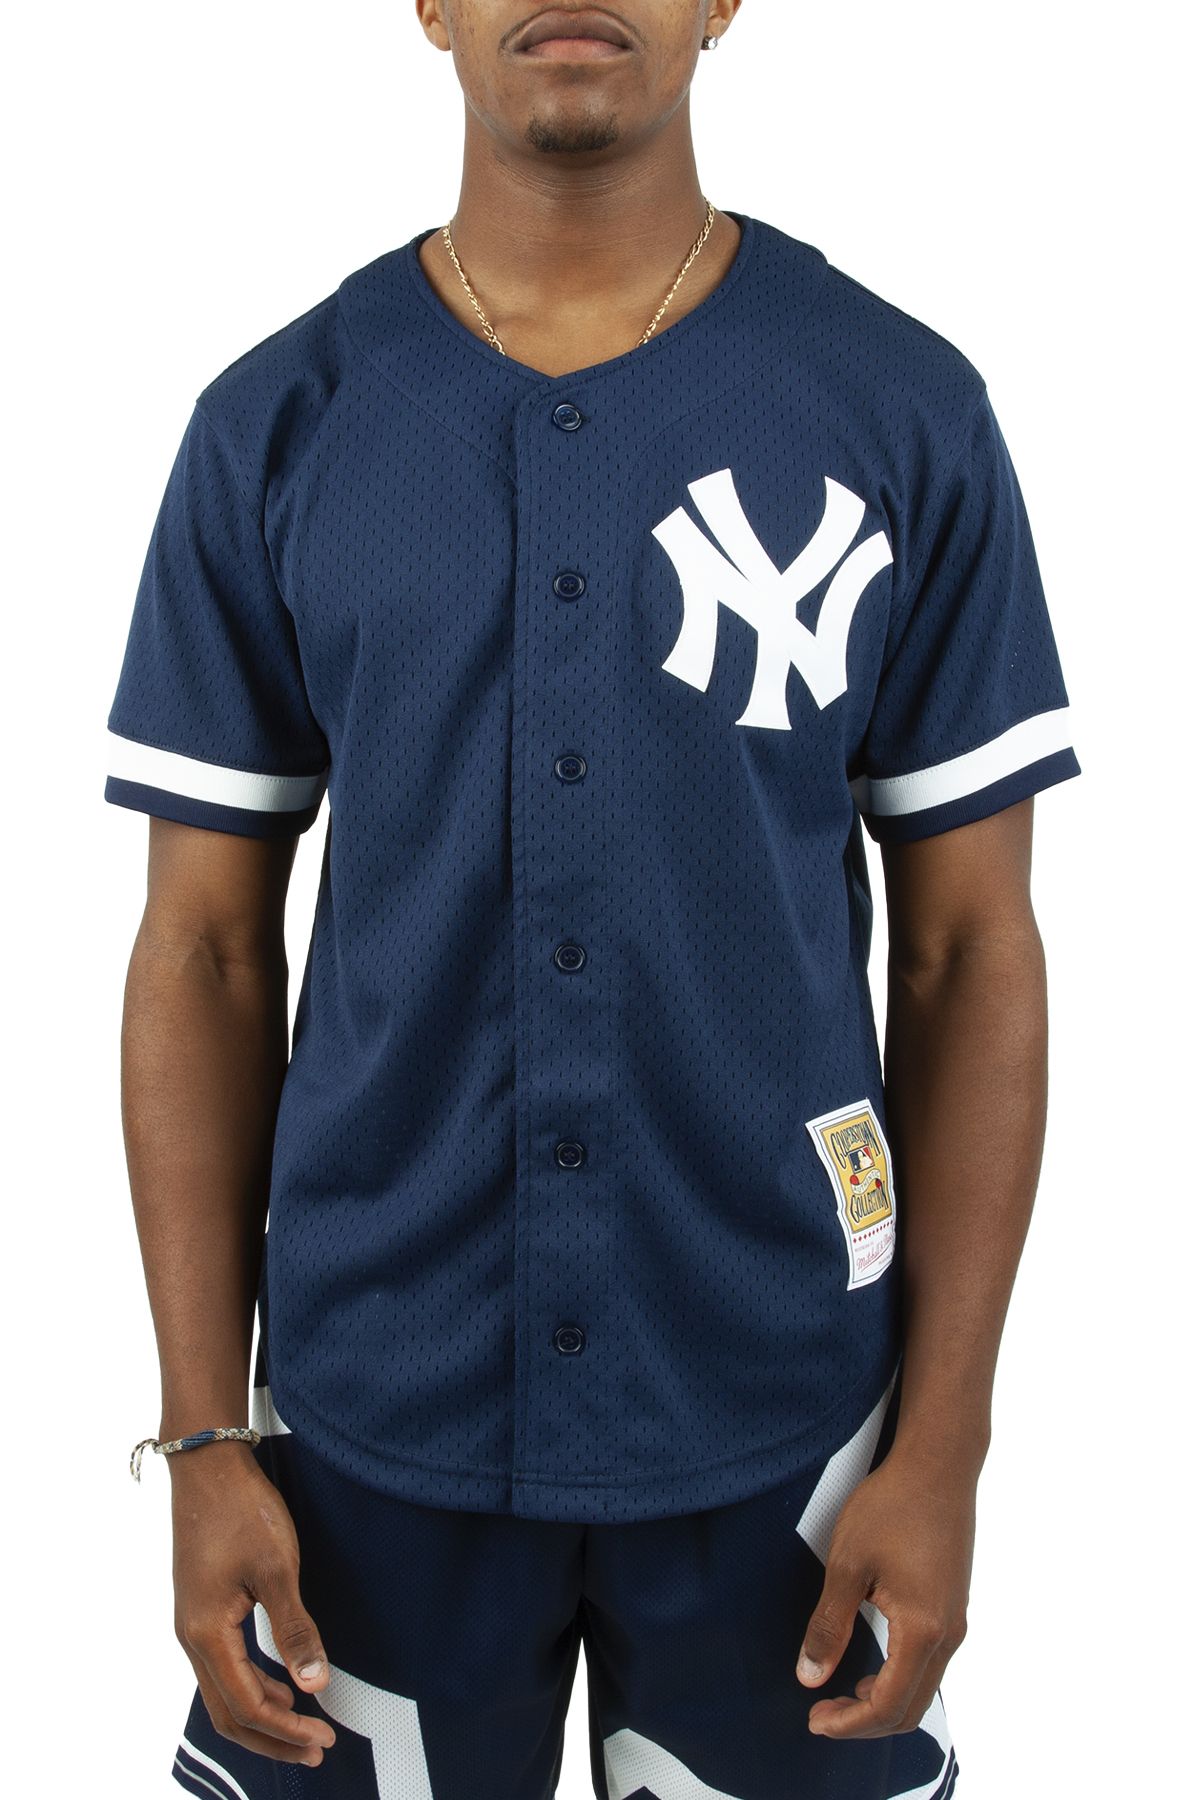 Women's Mitchell & Ness Navy New York Yankees Cooperstown Collection V-Neck Dress Size: Medium